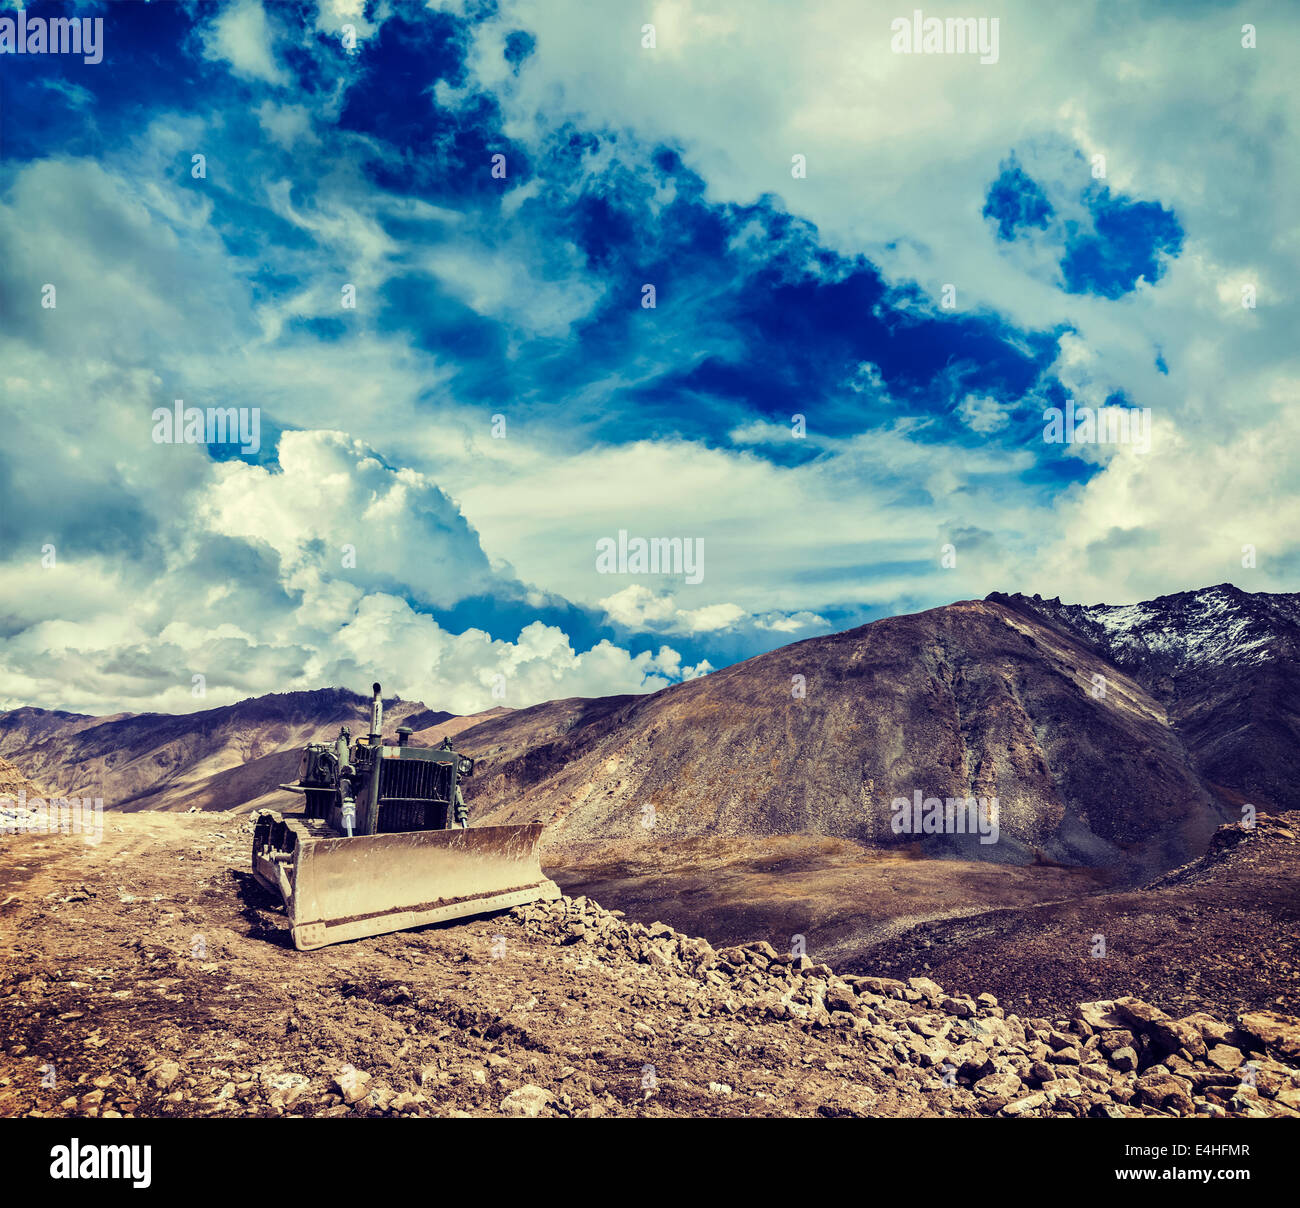 Vintage retro effect filtered hipster style travel image of Bulldozer on road in Himalayas. Ladakh, Jammu and Kashmir, India Stock Photo